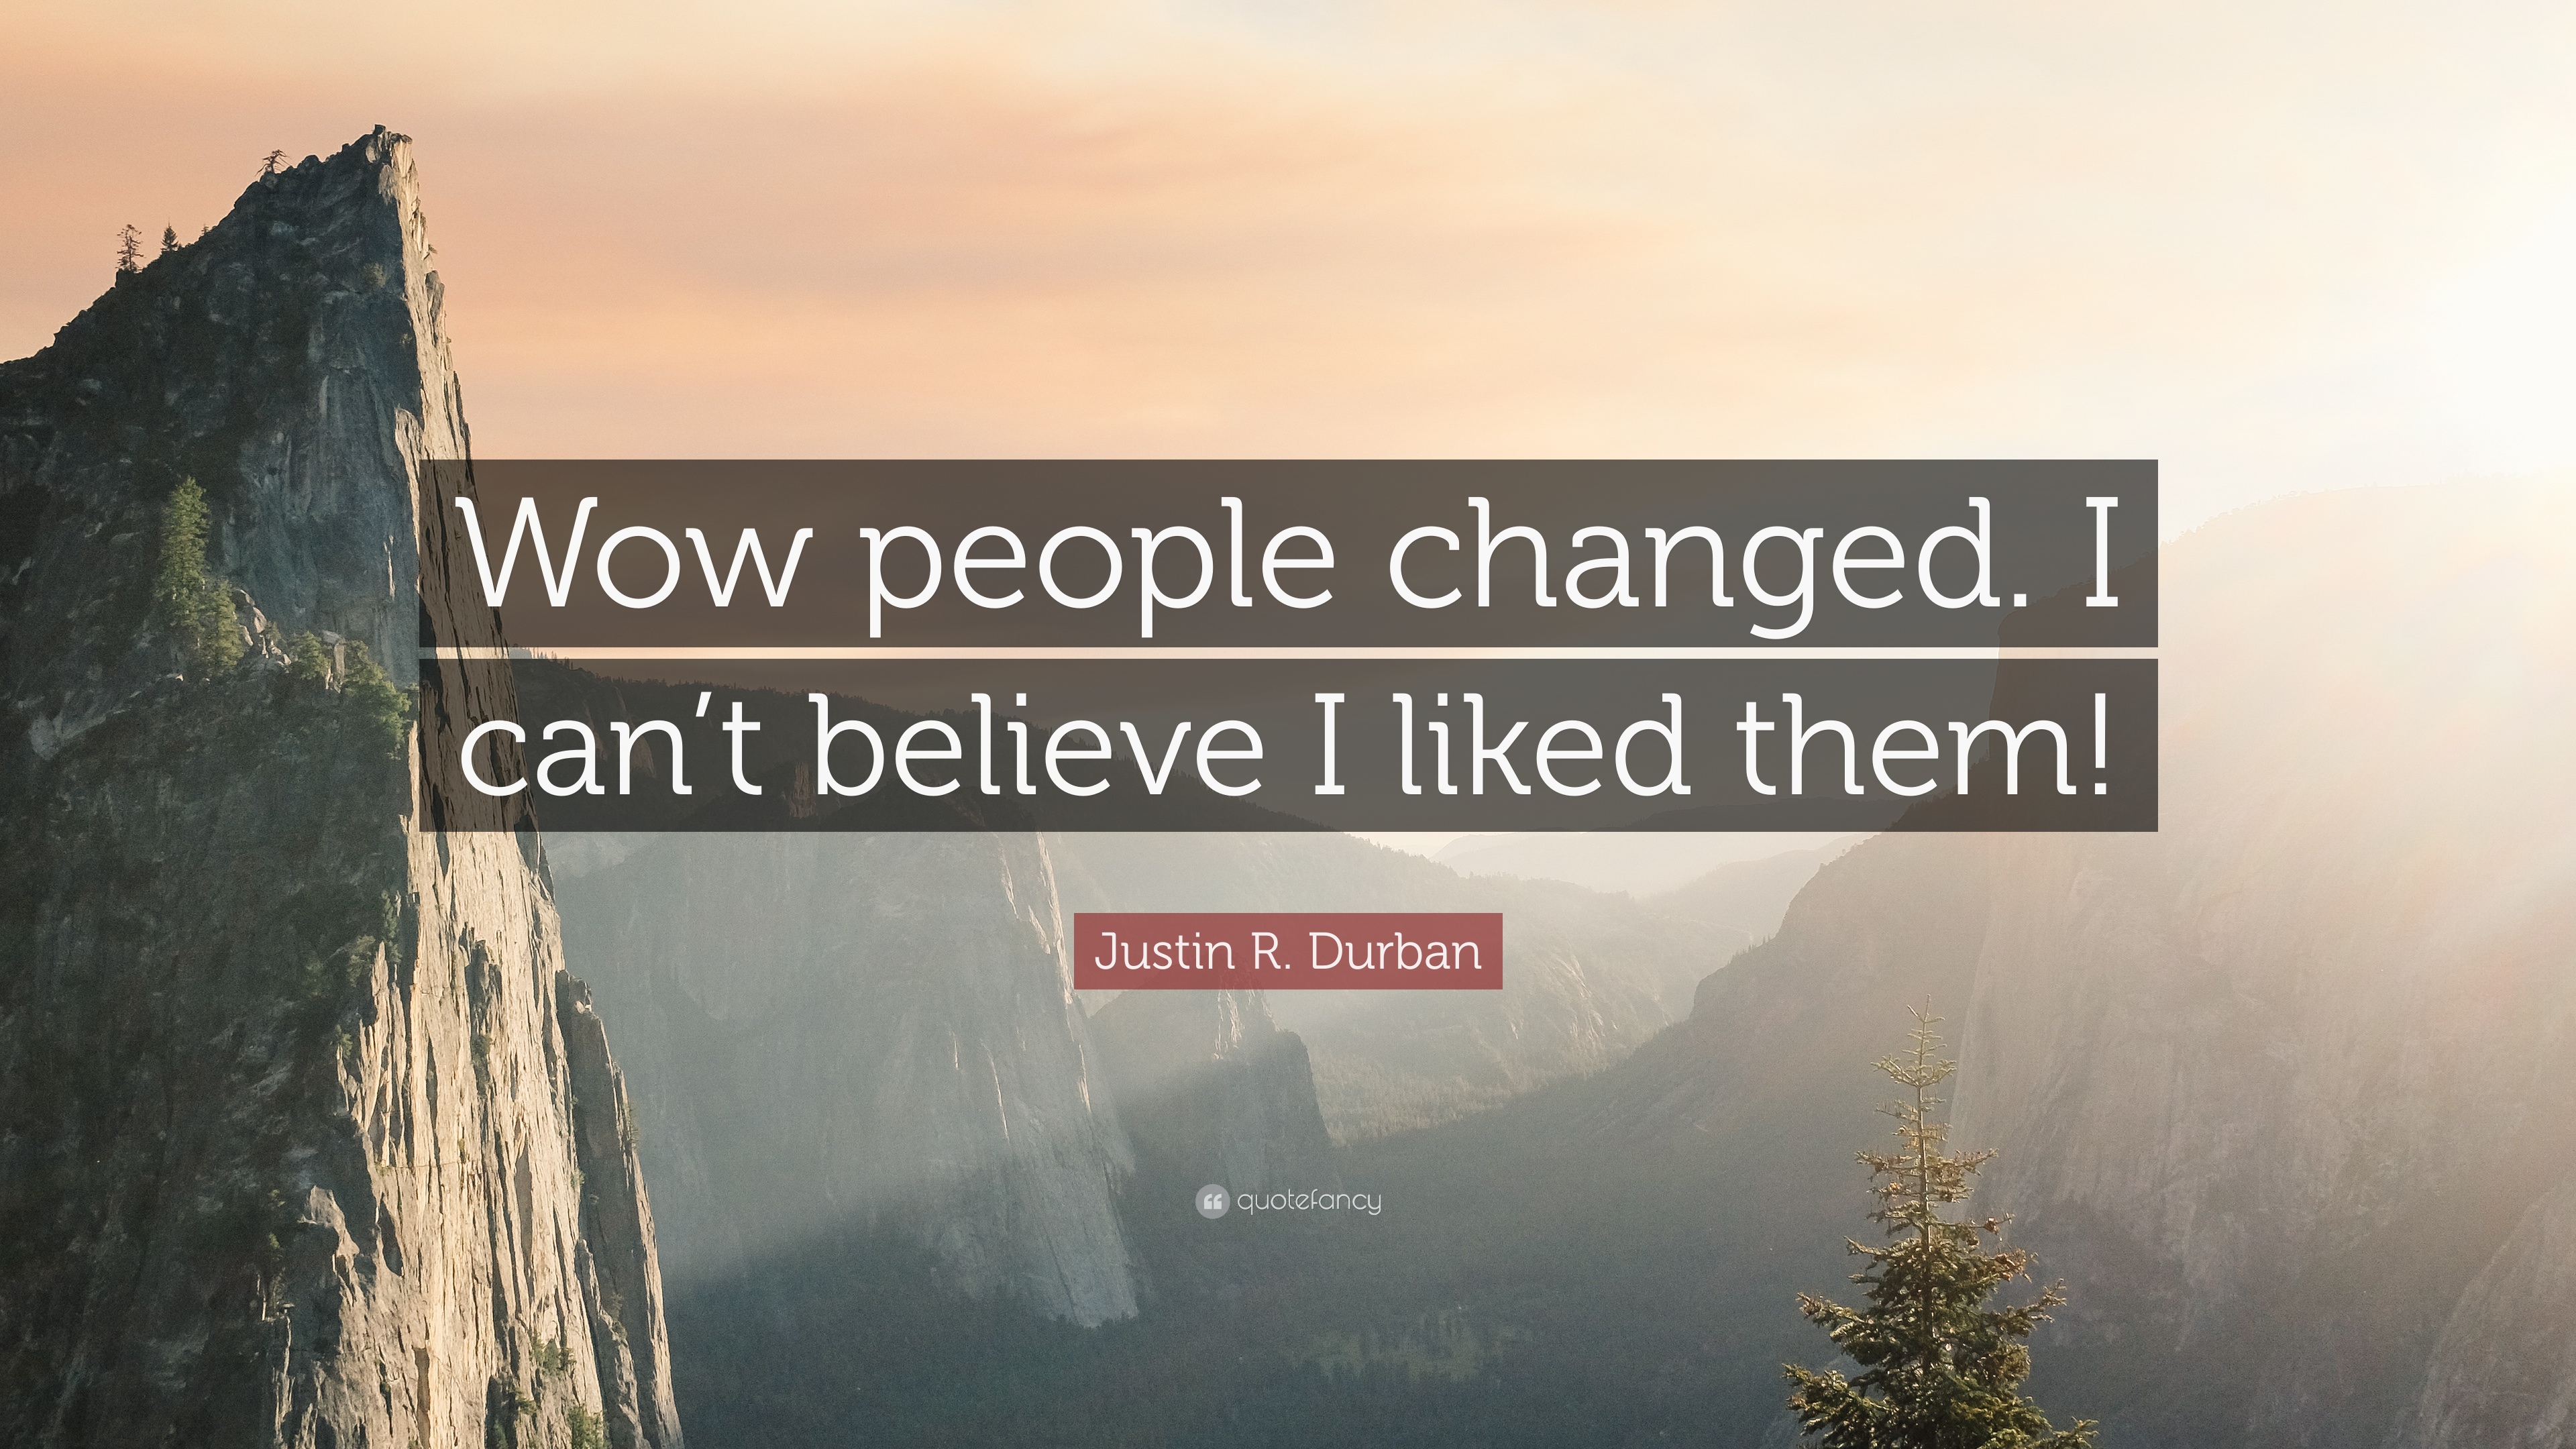 Justin R. Durban Quote: “Wow people changed. I can't believe I liked